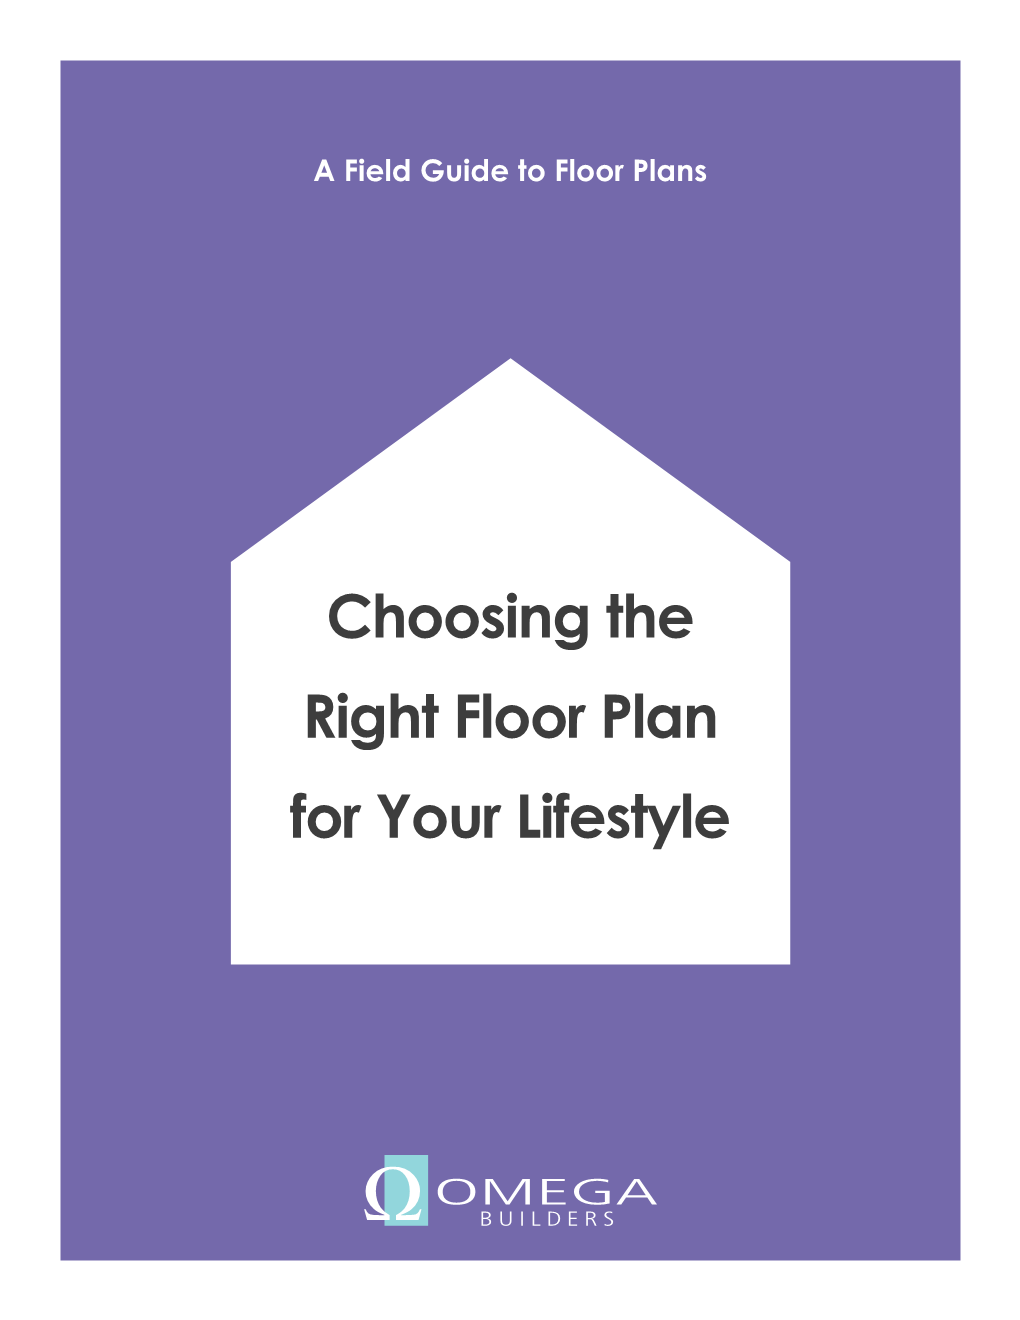 Choosing the Right Floor Plan for Your Lifestyle Choosing the Right Floor Plan for Your Lifestyle Is a Field Guide for Homebuyers Provided by Omega Builders